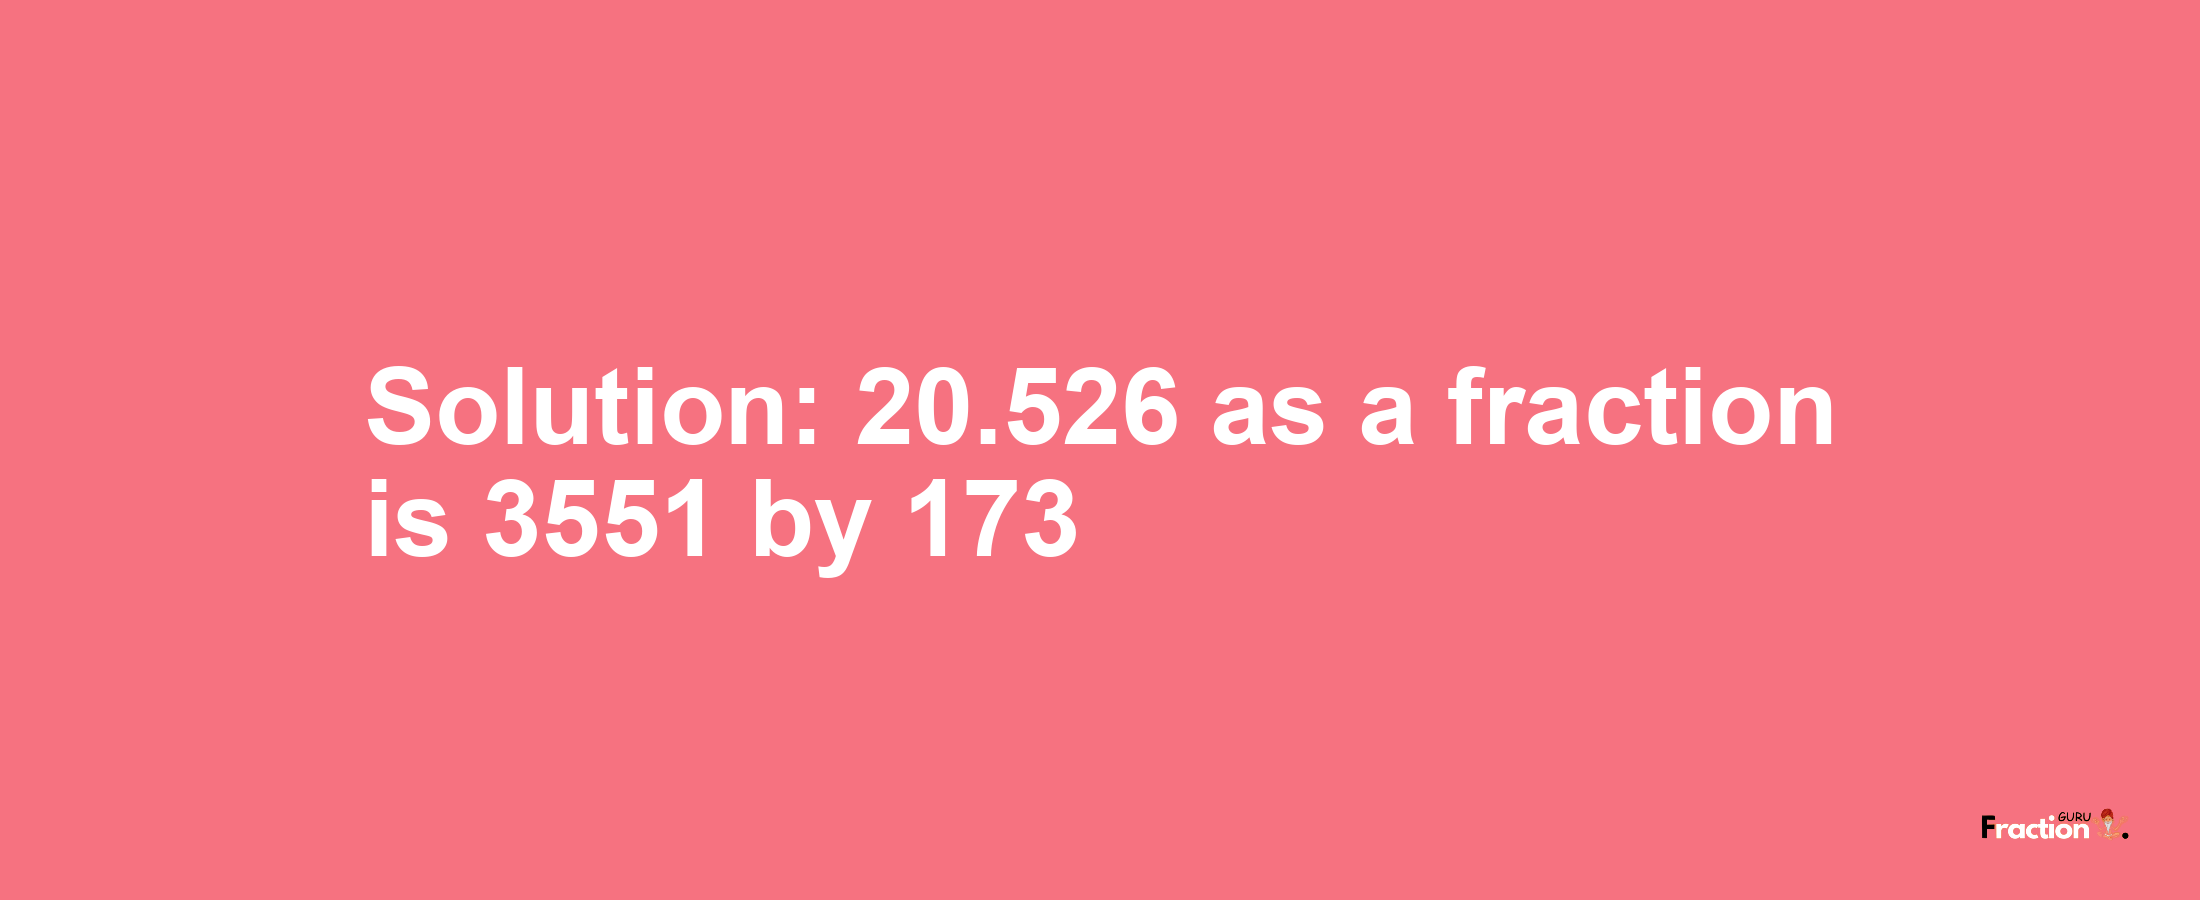 Solution:20.526 as a fraction is 3551/173